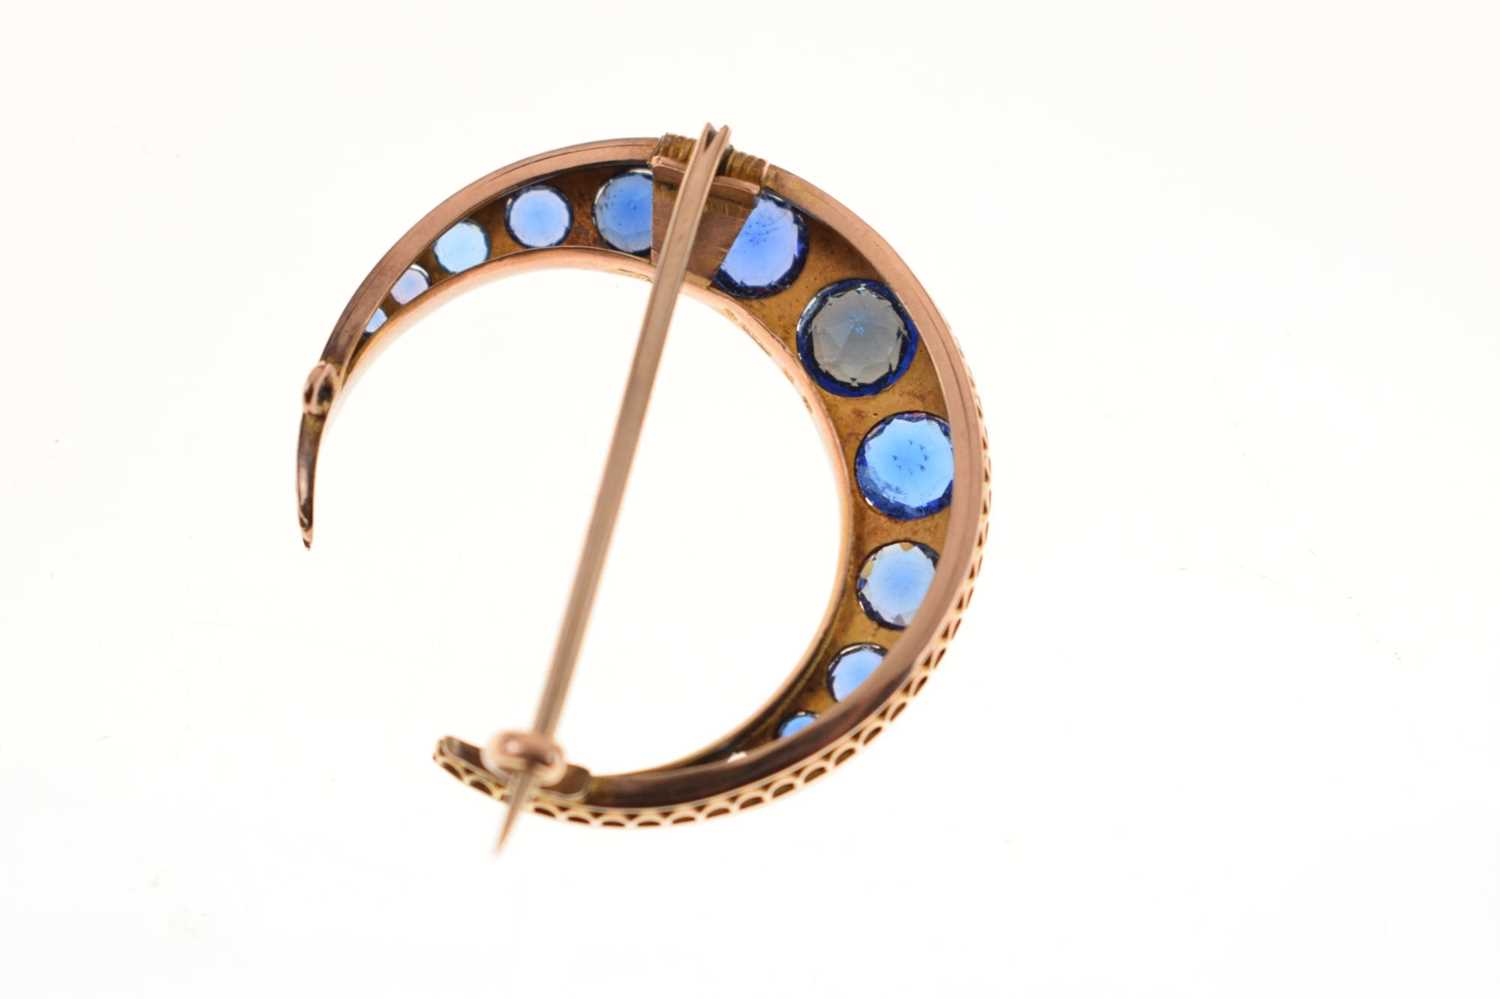 Edwardian 9ct gold crescent shaped brooch - Image 2 of 4